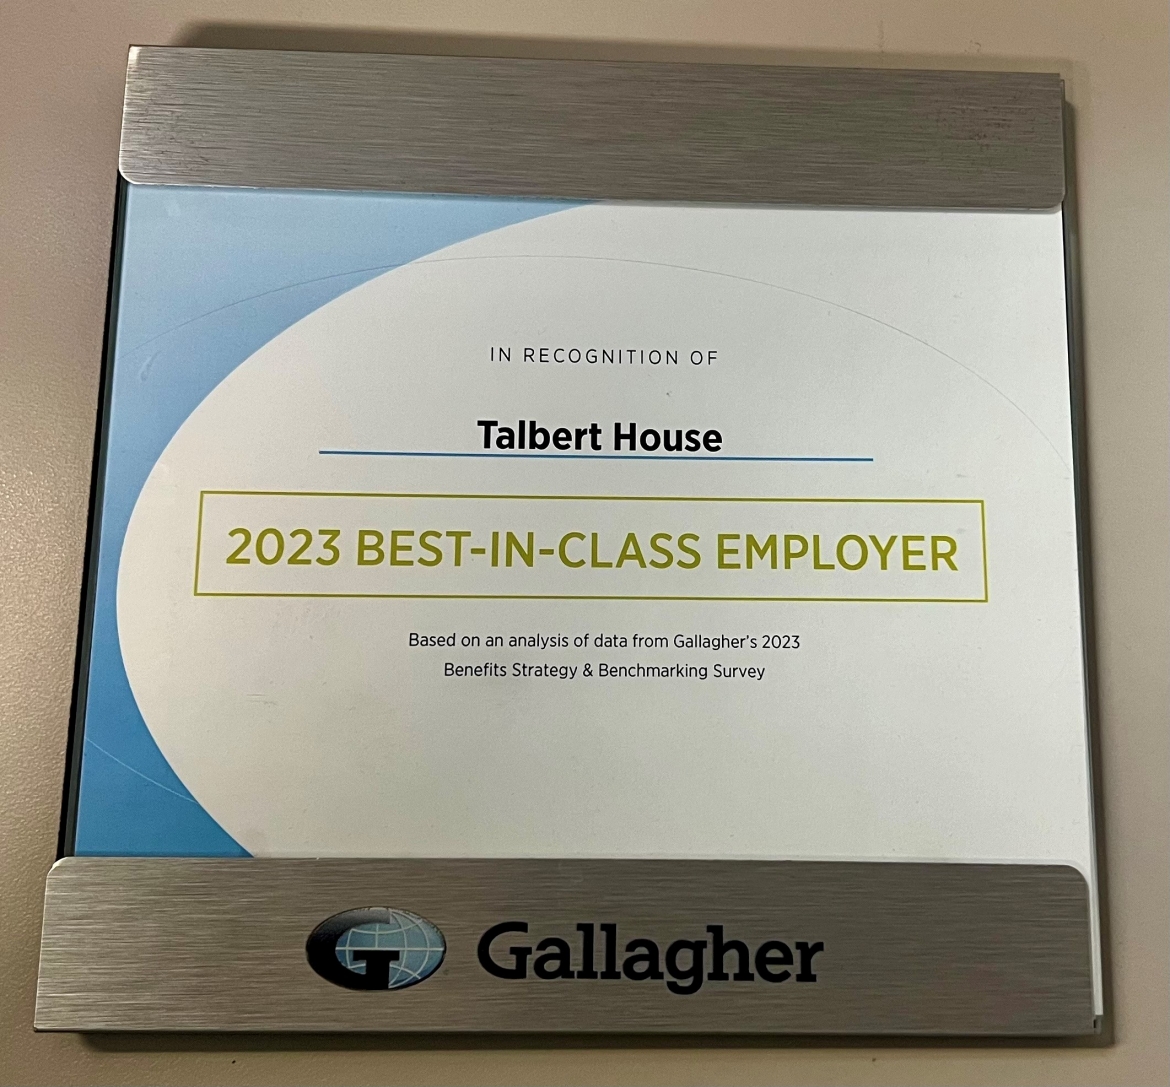 Talbert House Awarded Best-in-Class Employer by Gallagher 